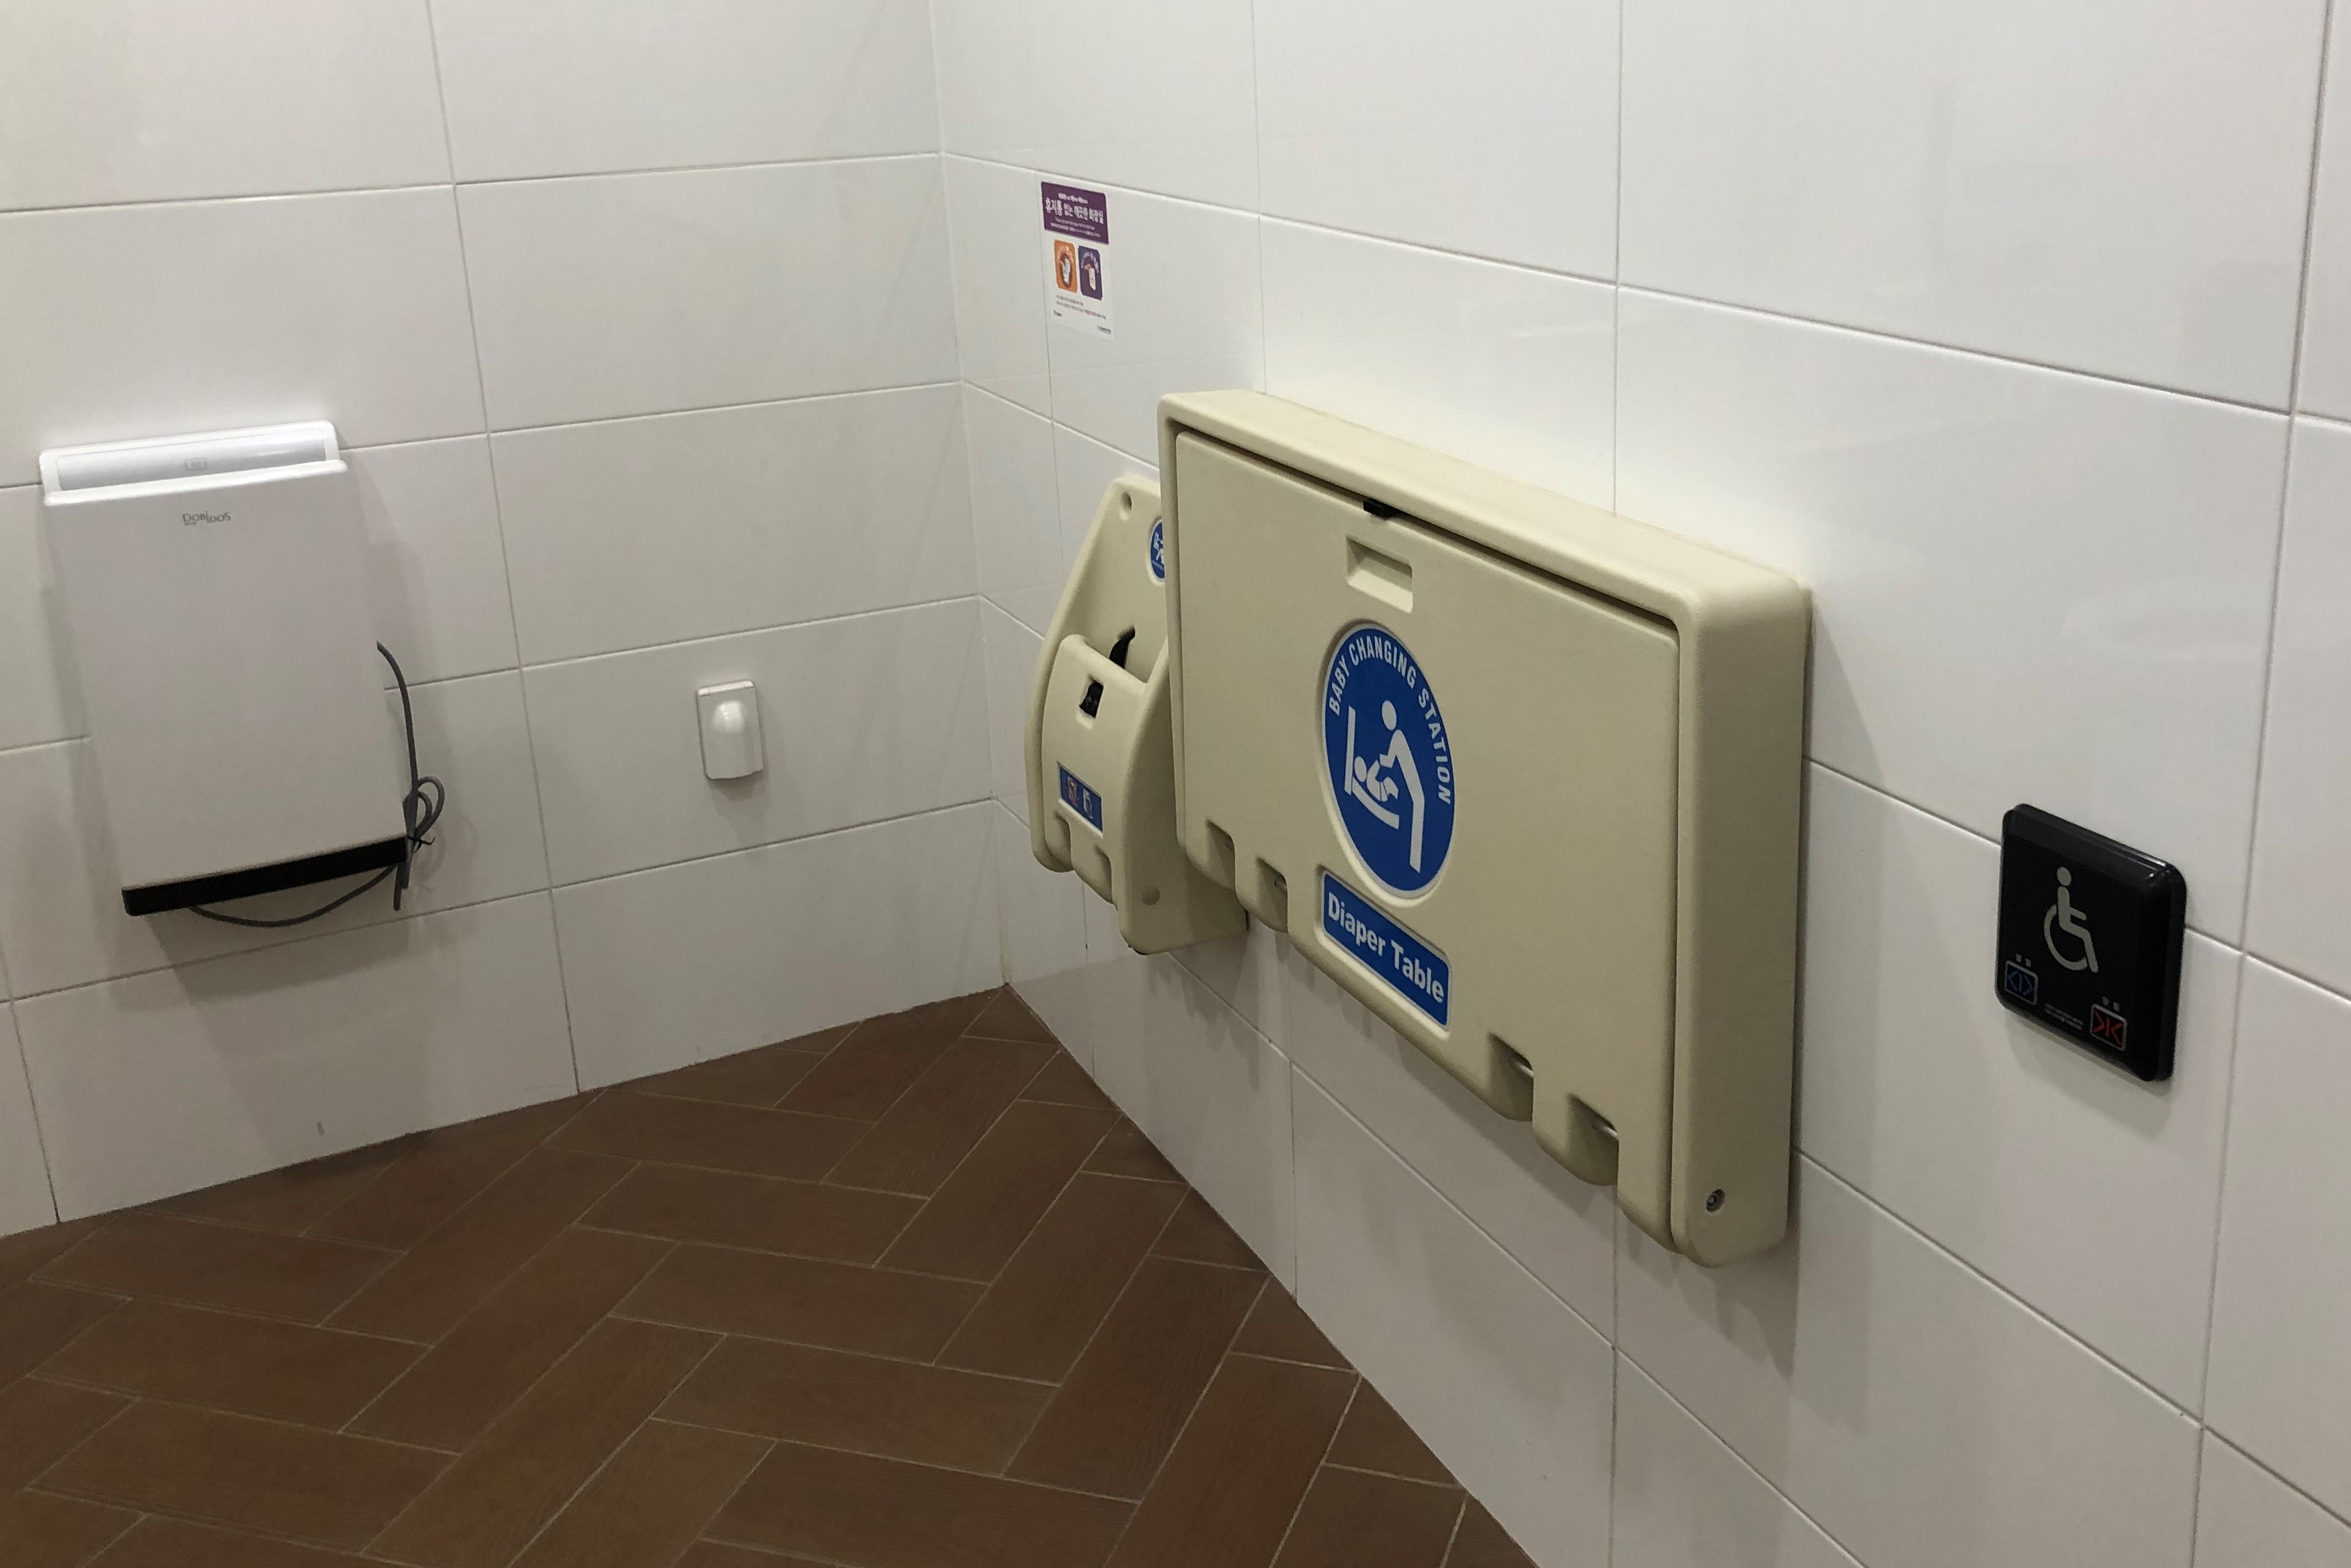 Lounge for families with children0 : Diaper changing station inside the accessible restroom
